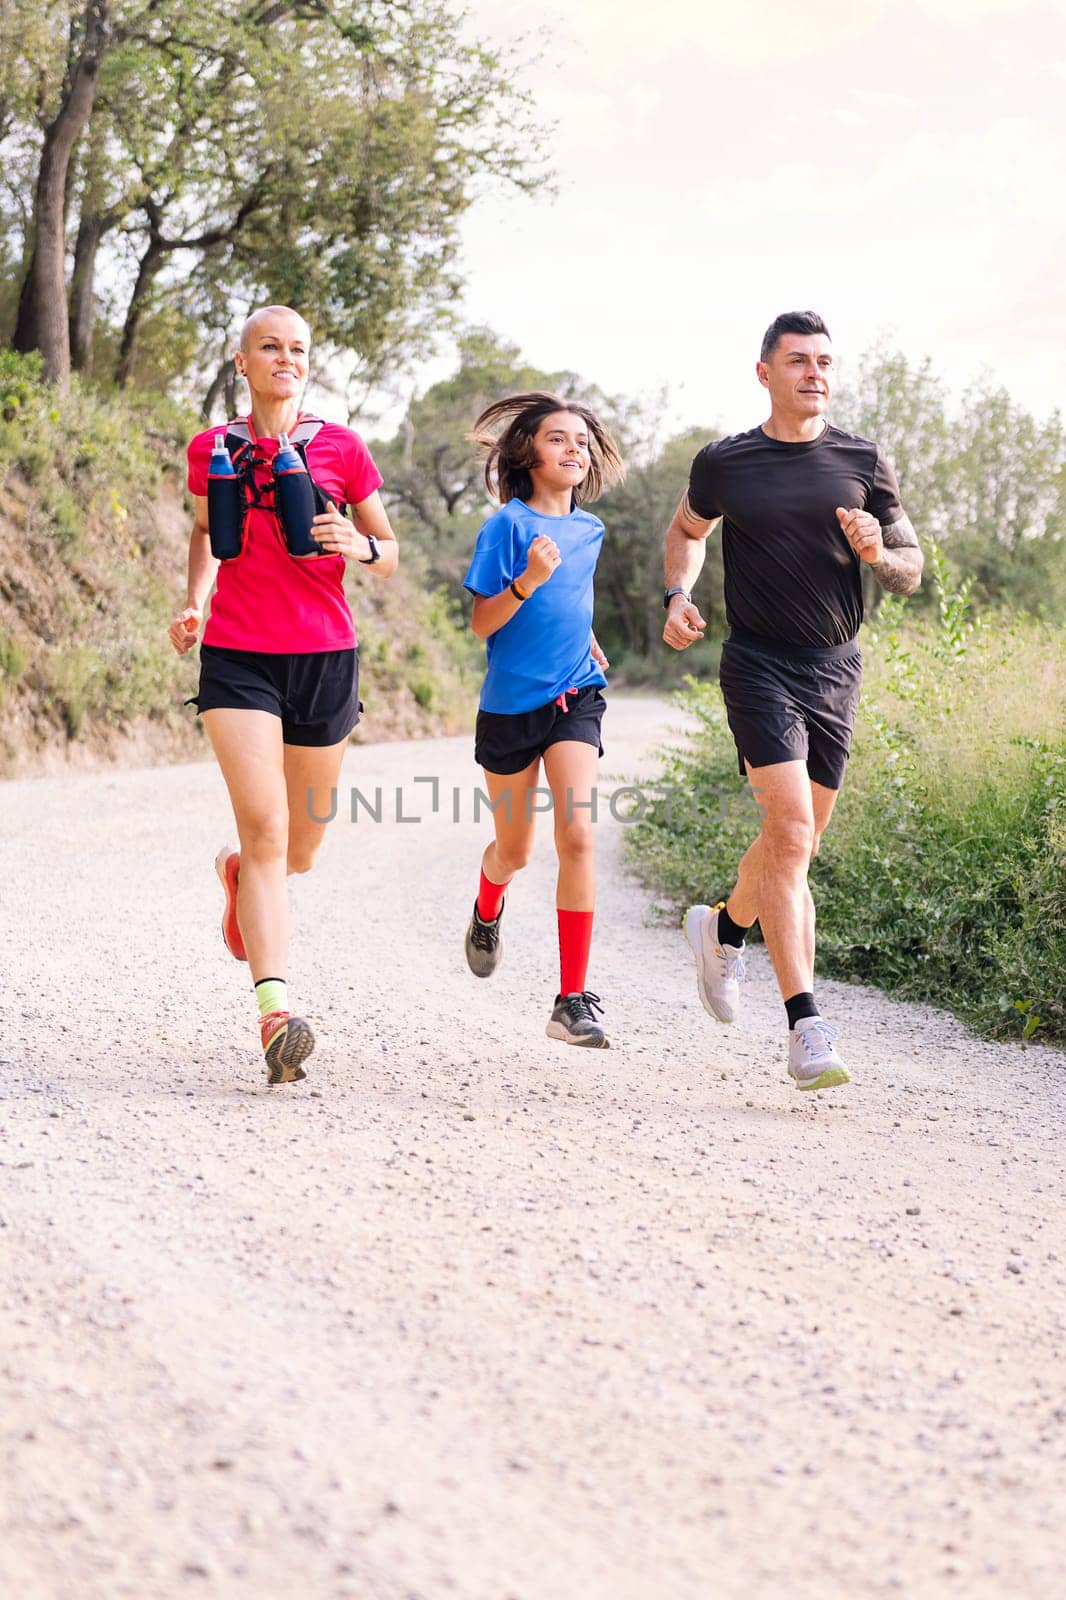 family practicing trail running in the countryside by raulmelldo